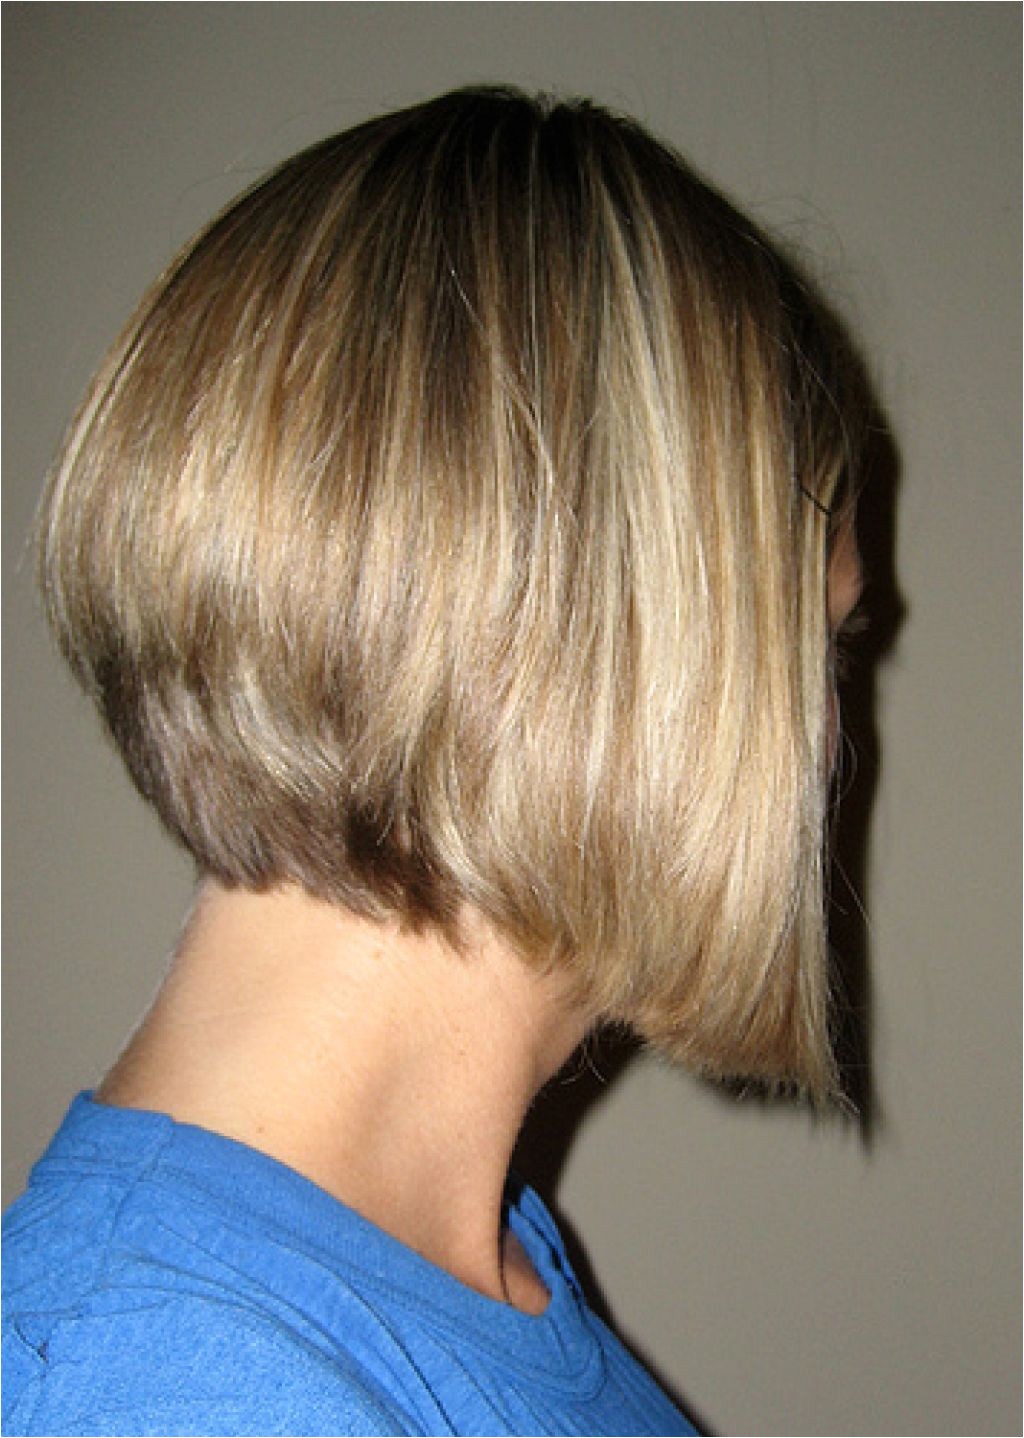 Pictures Of Bob Haircuts From the Back E Checklist that You Should Keep In Mind before